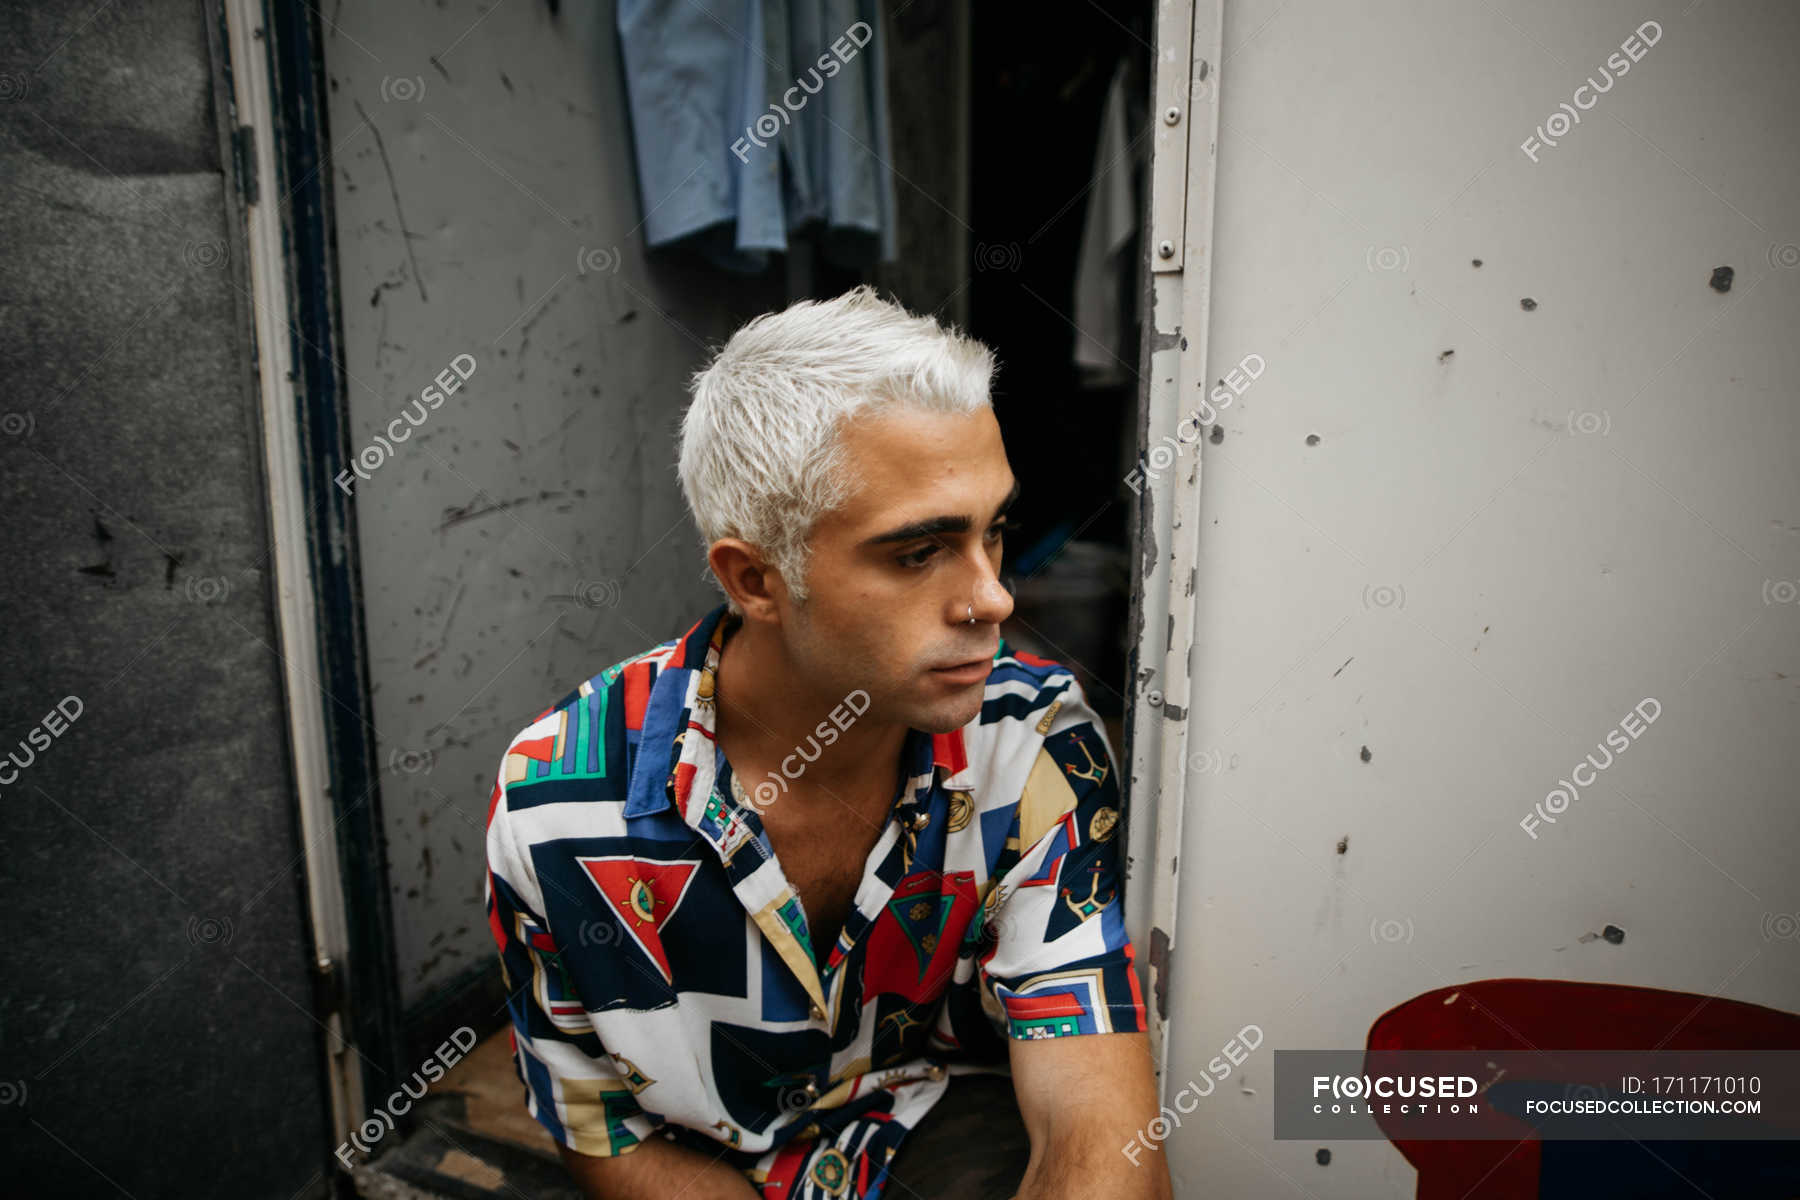 Man with bleached hair looking away — shirt, people - Stock Photo |  #171171010